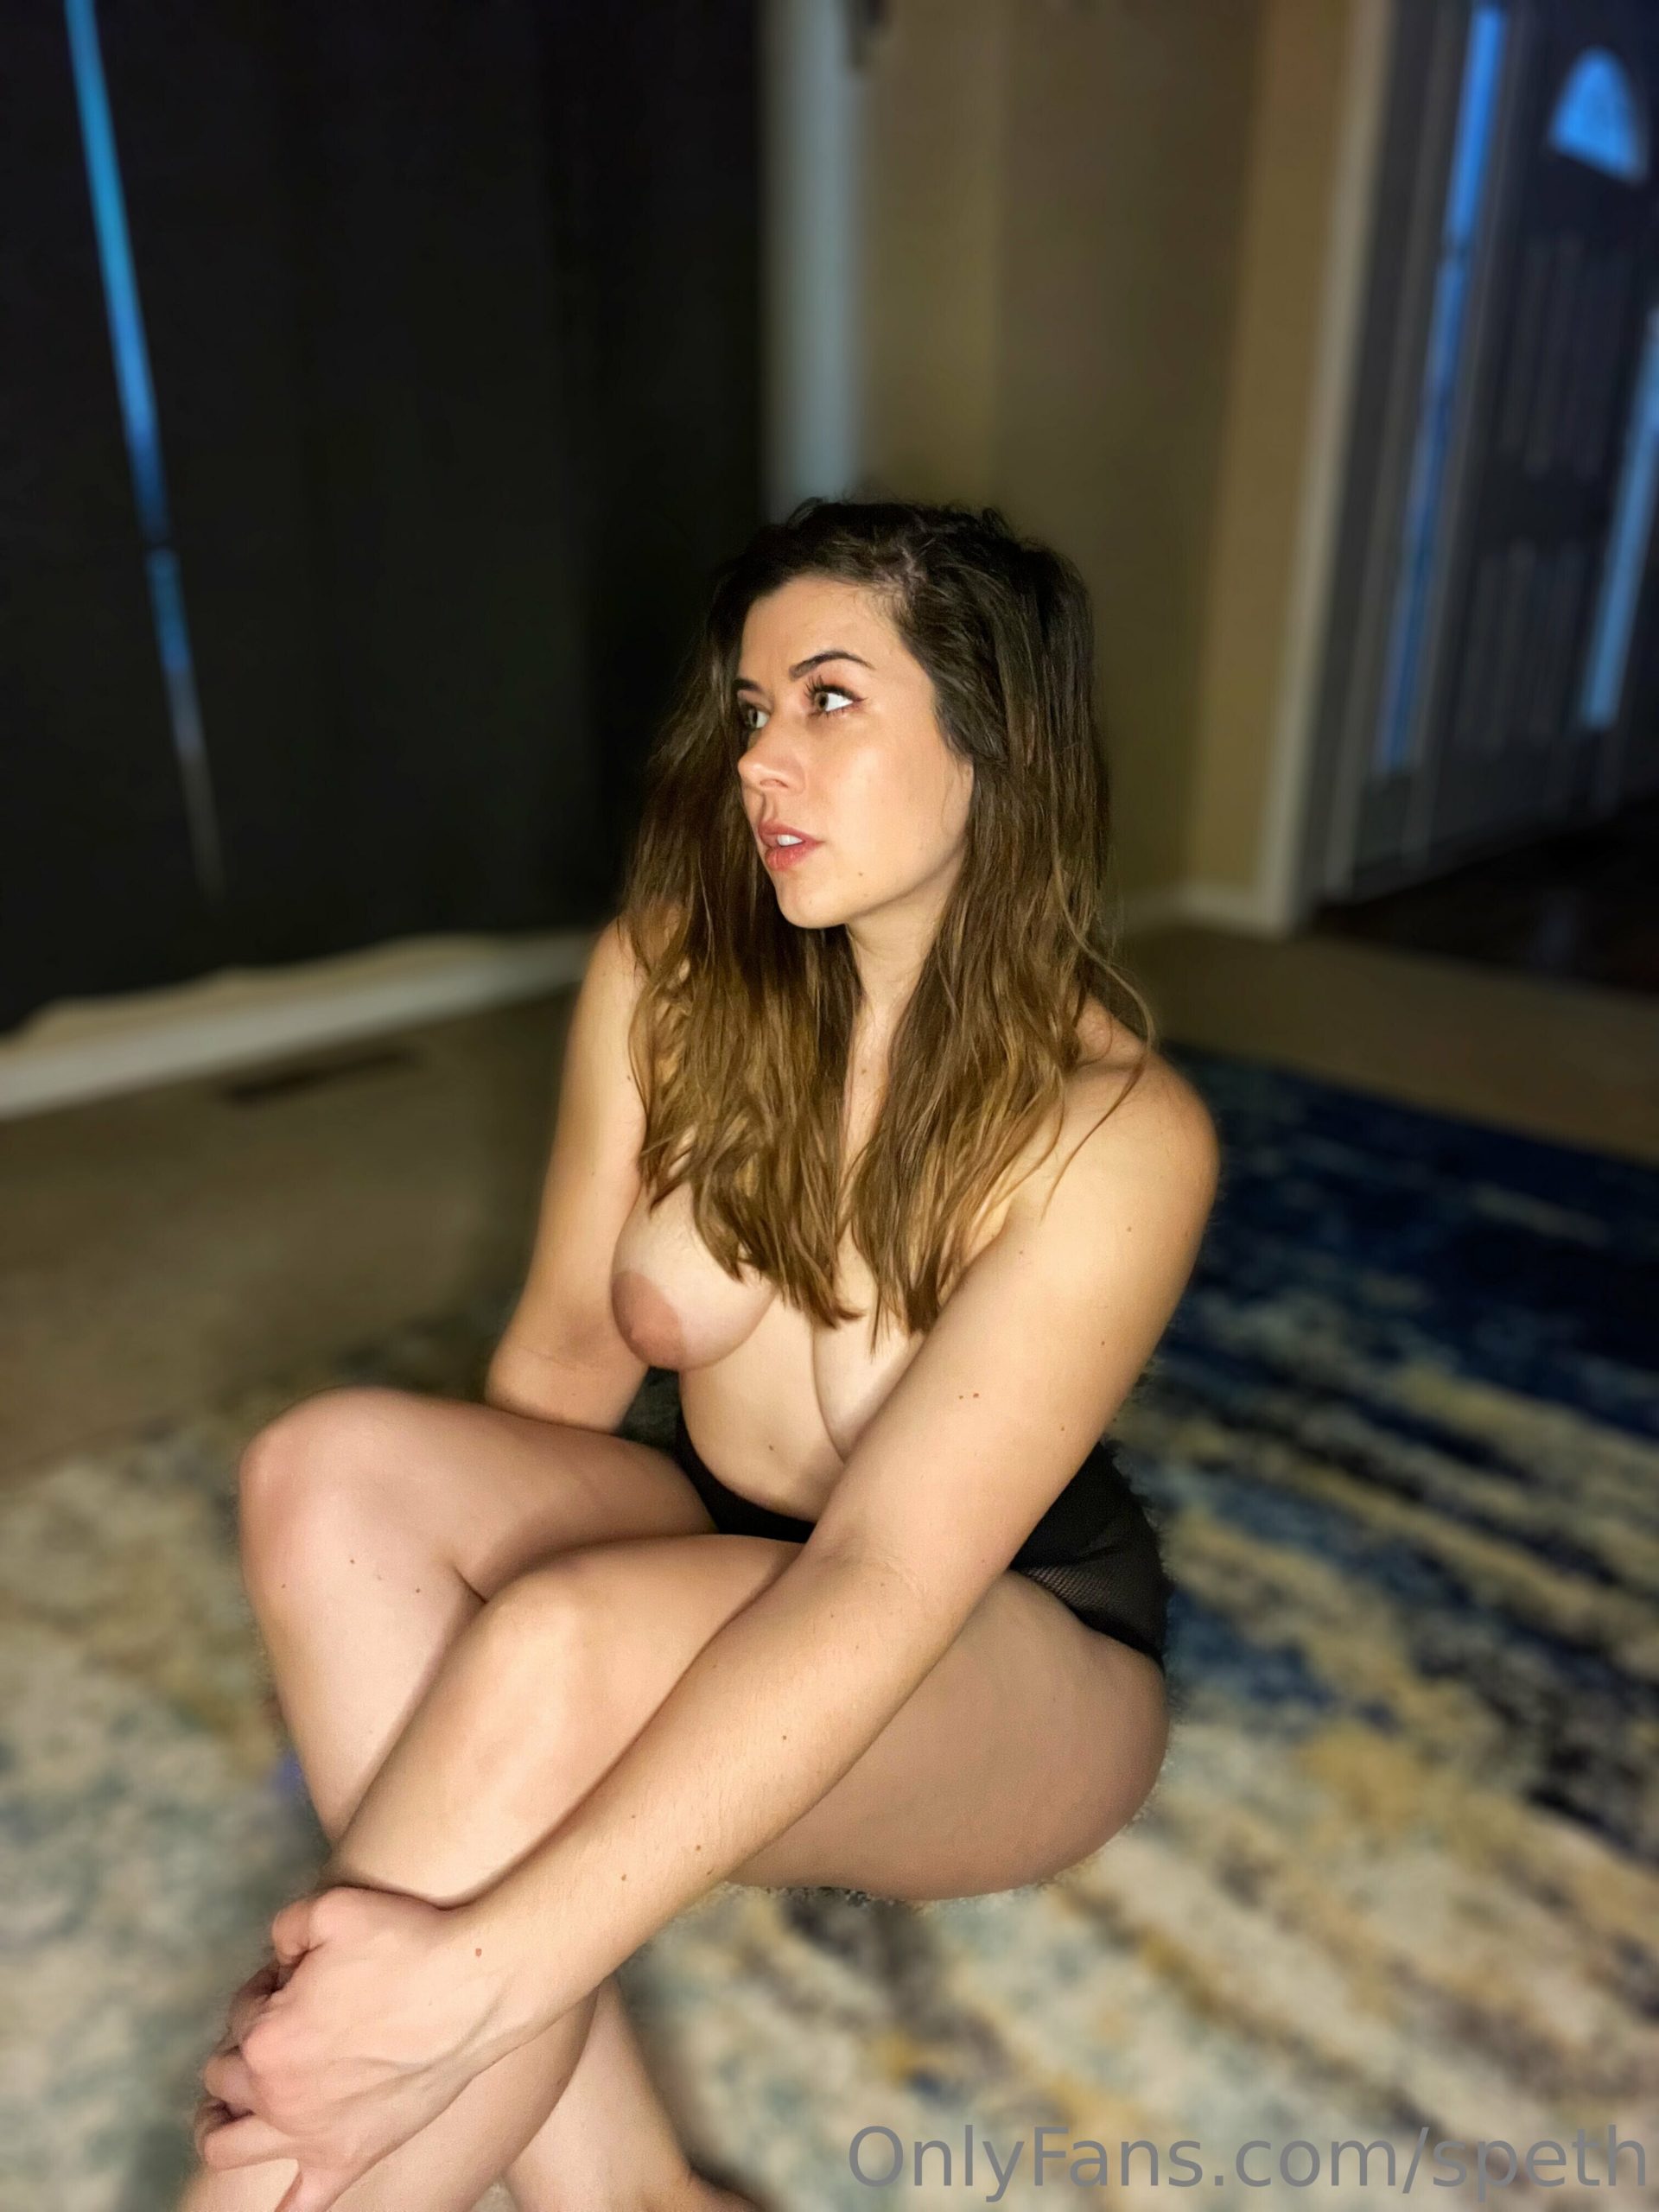 Elspeth Eastman Nude Onlyfans Twitch Streamer Photos 12 scaled